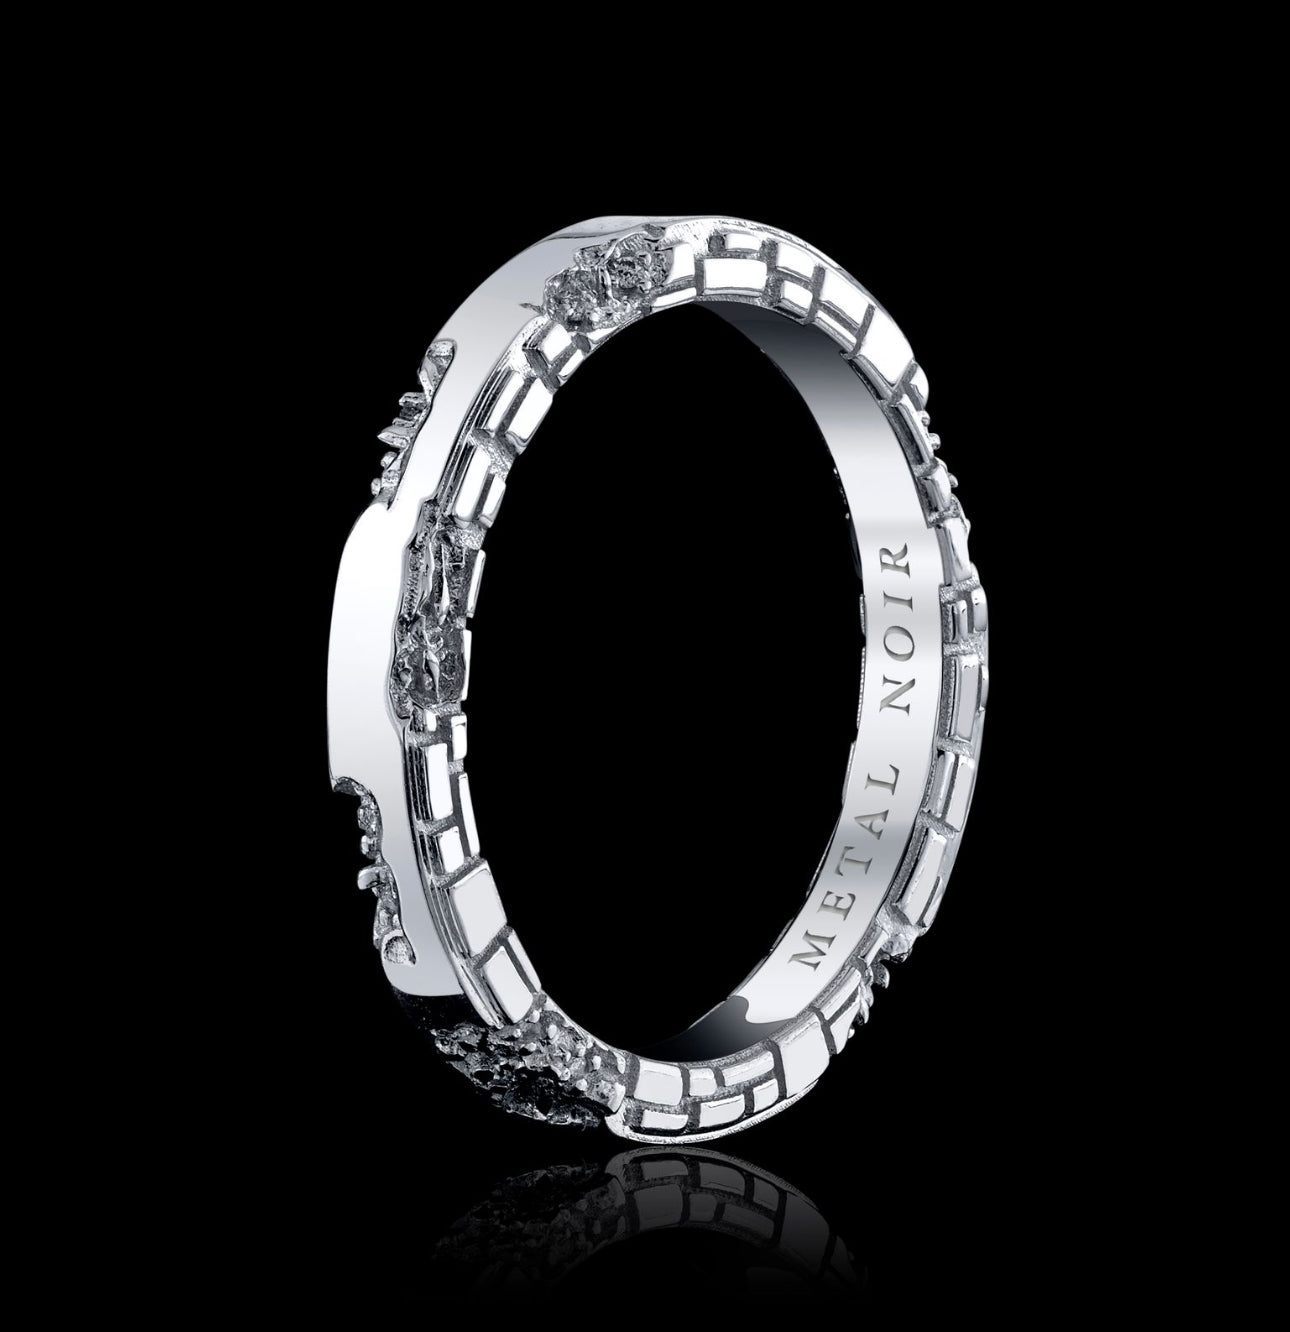 ‘Eroded Architecture’ ULTRATHIN Ring in solid 18k white gold • Edition of 50